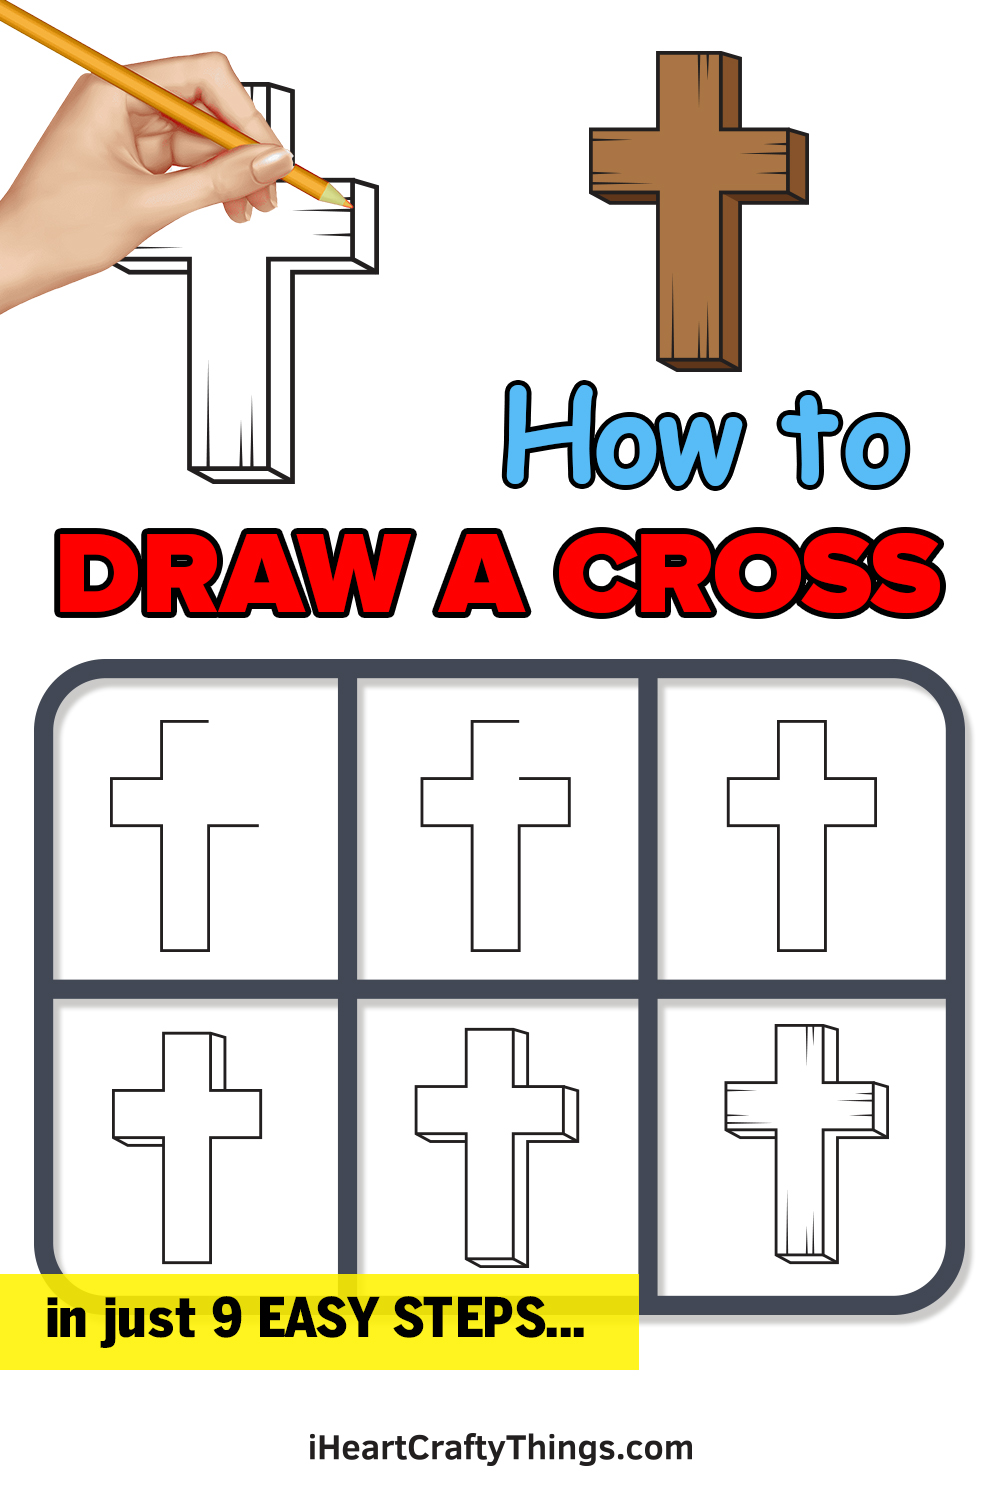 how to draw a cross in 9 easy steps